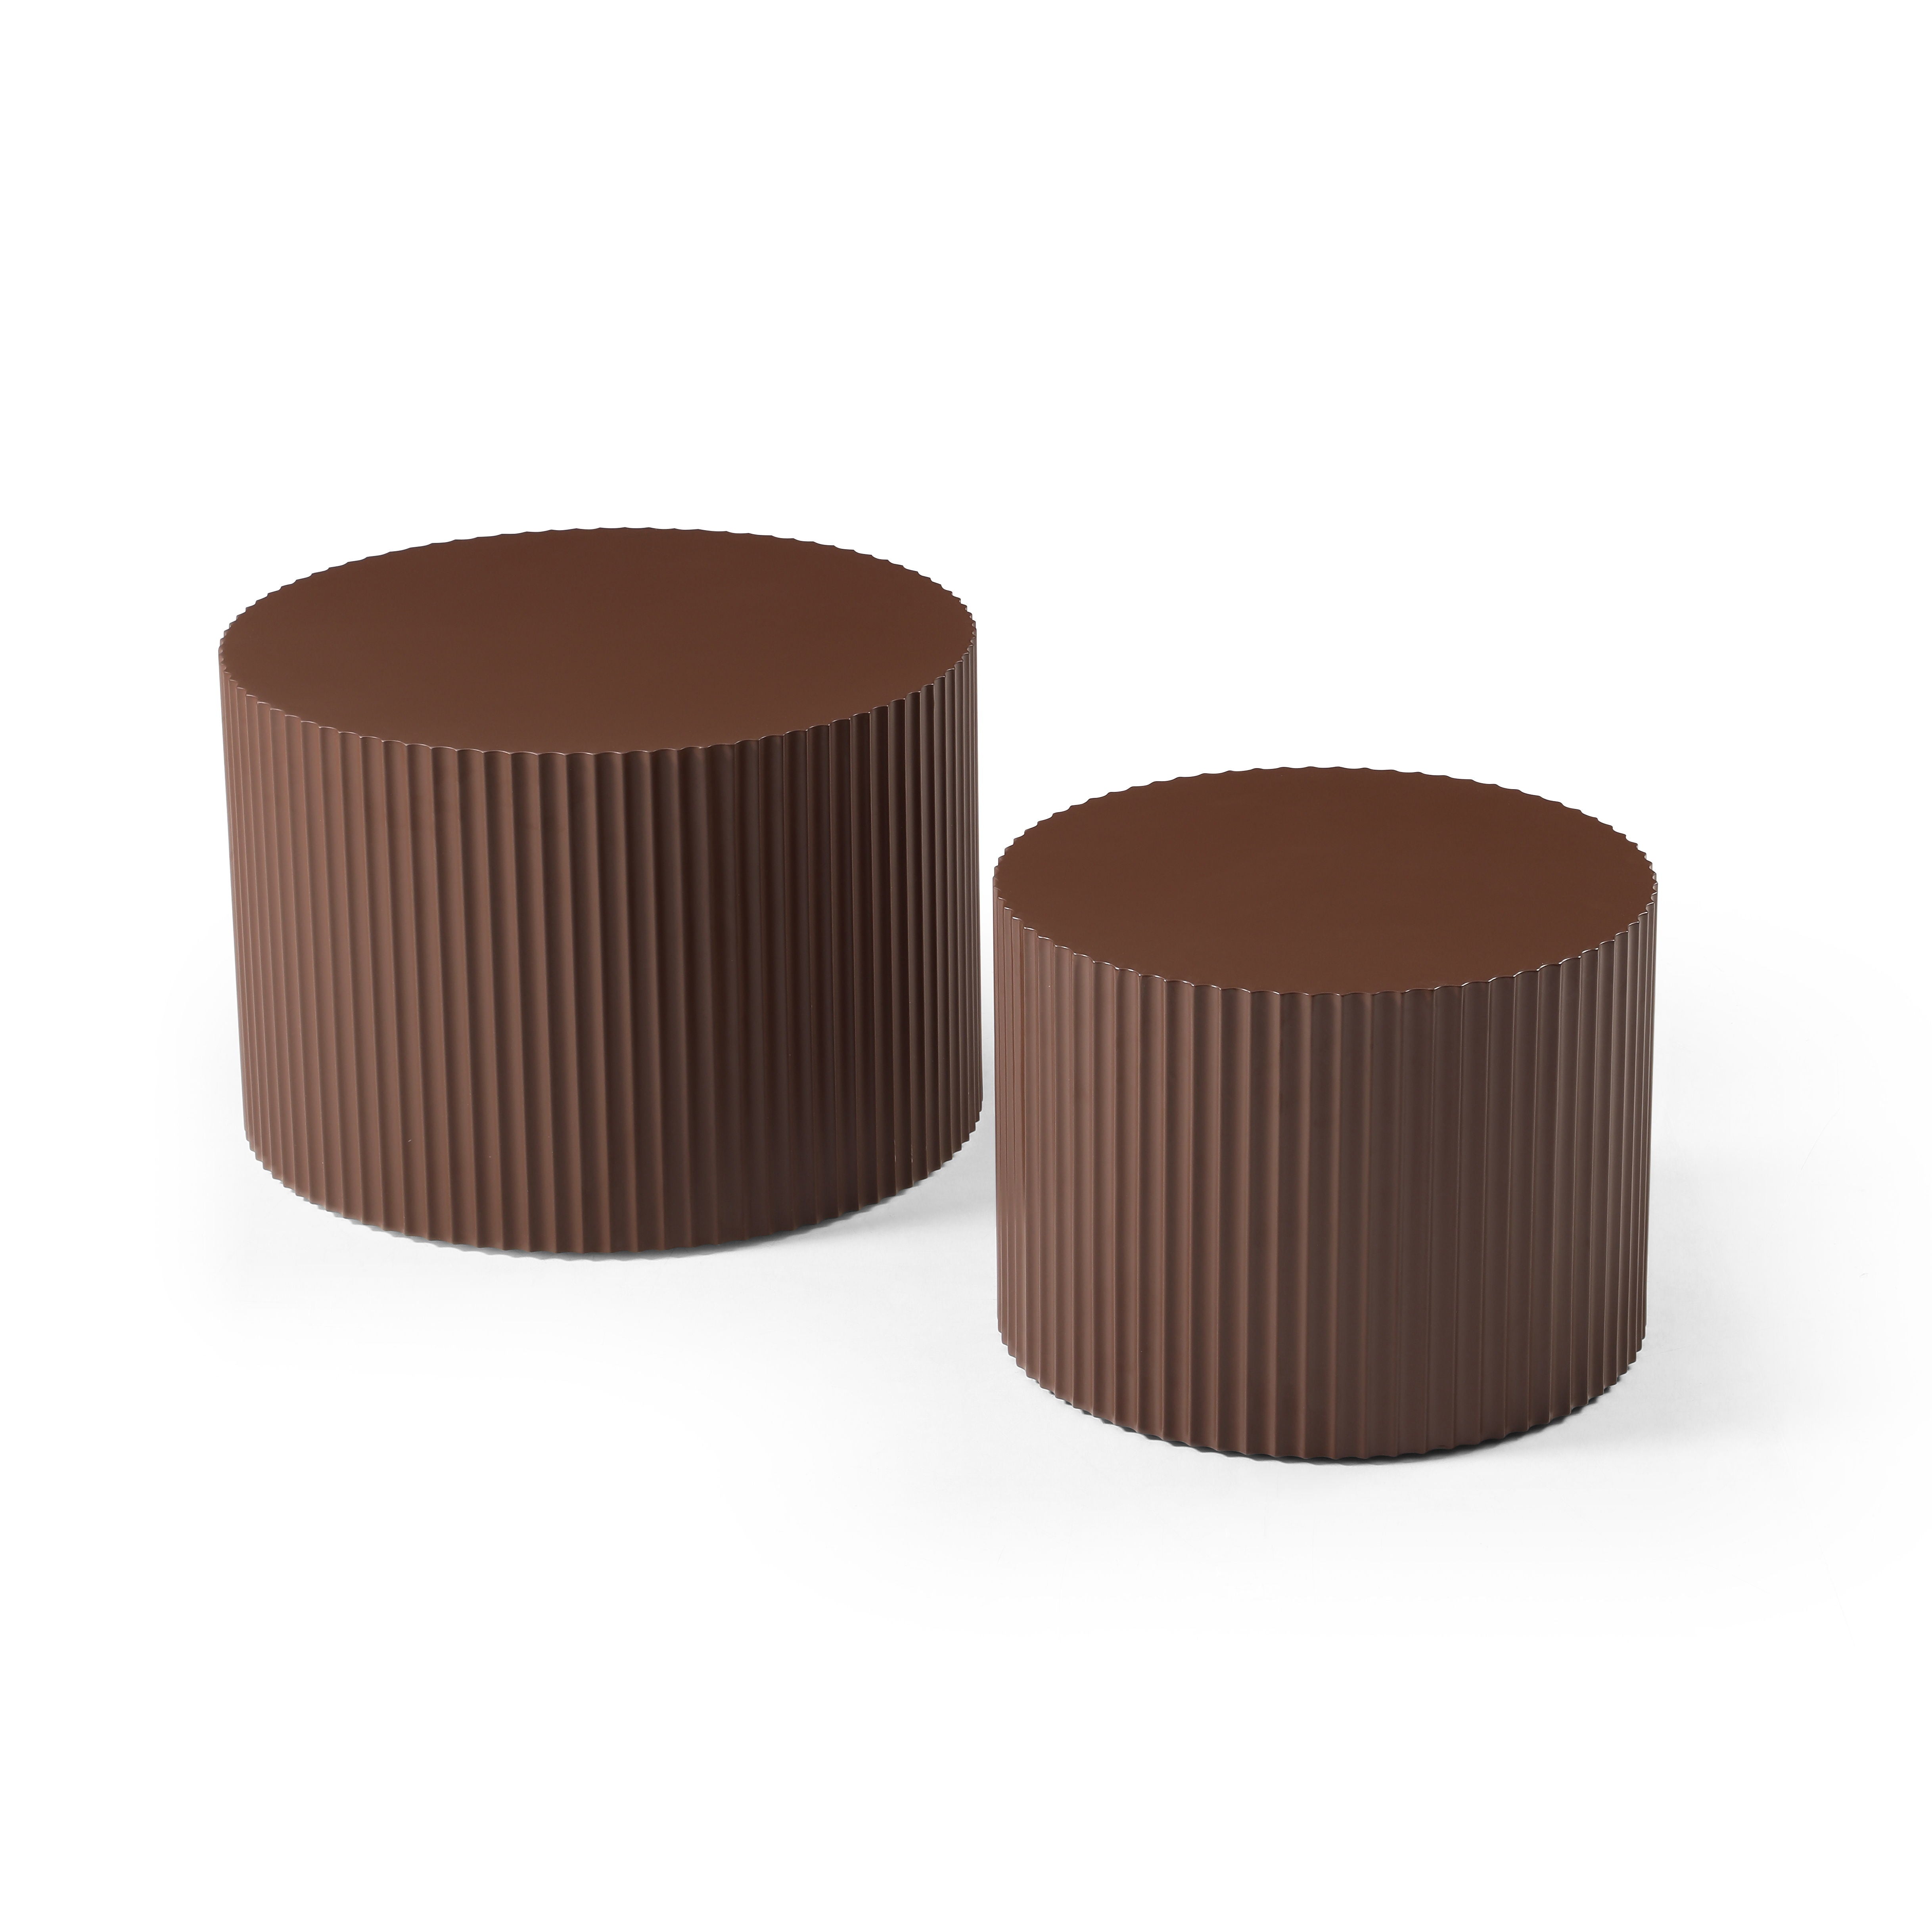 Nesting Table (Set of 2) Coffee Table Set For Living Room / Leisure Area, Brown